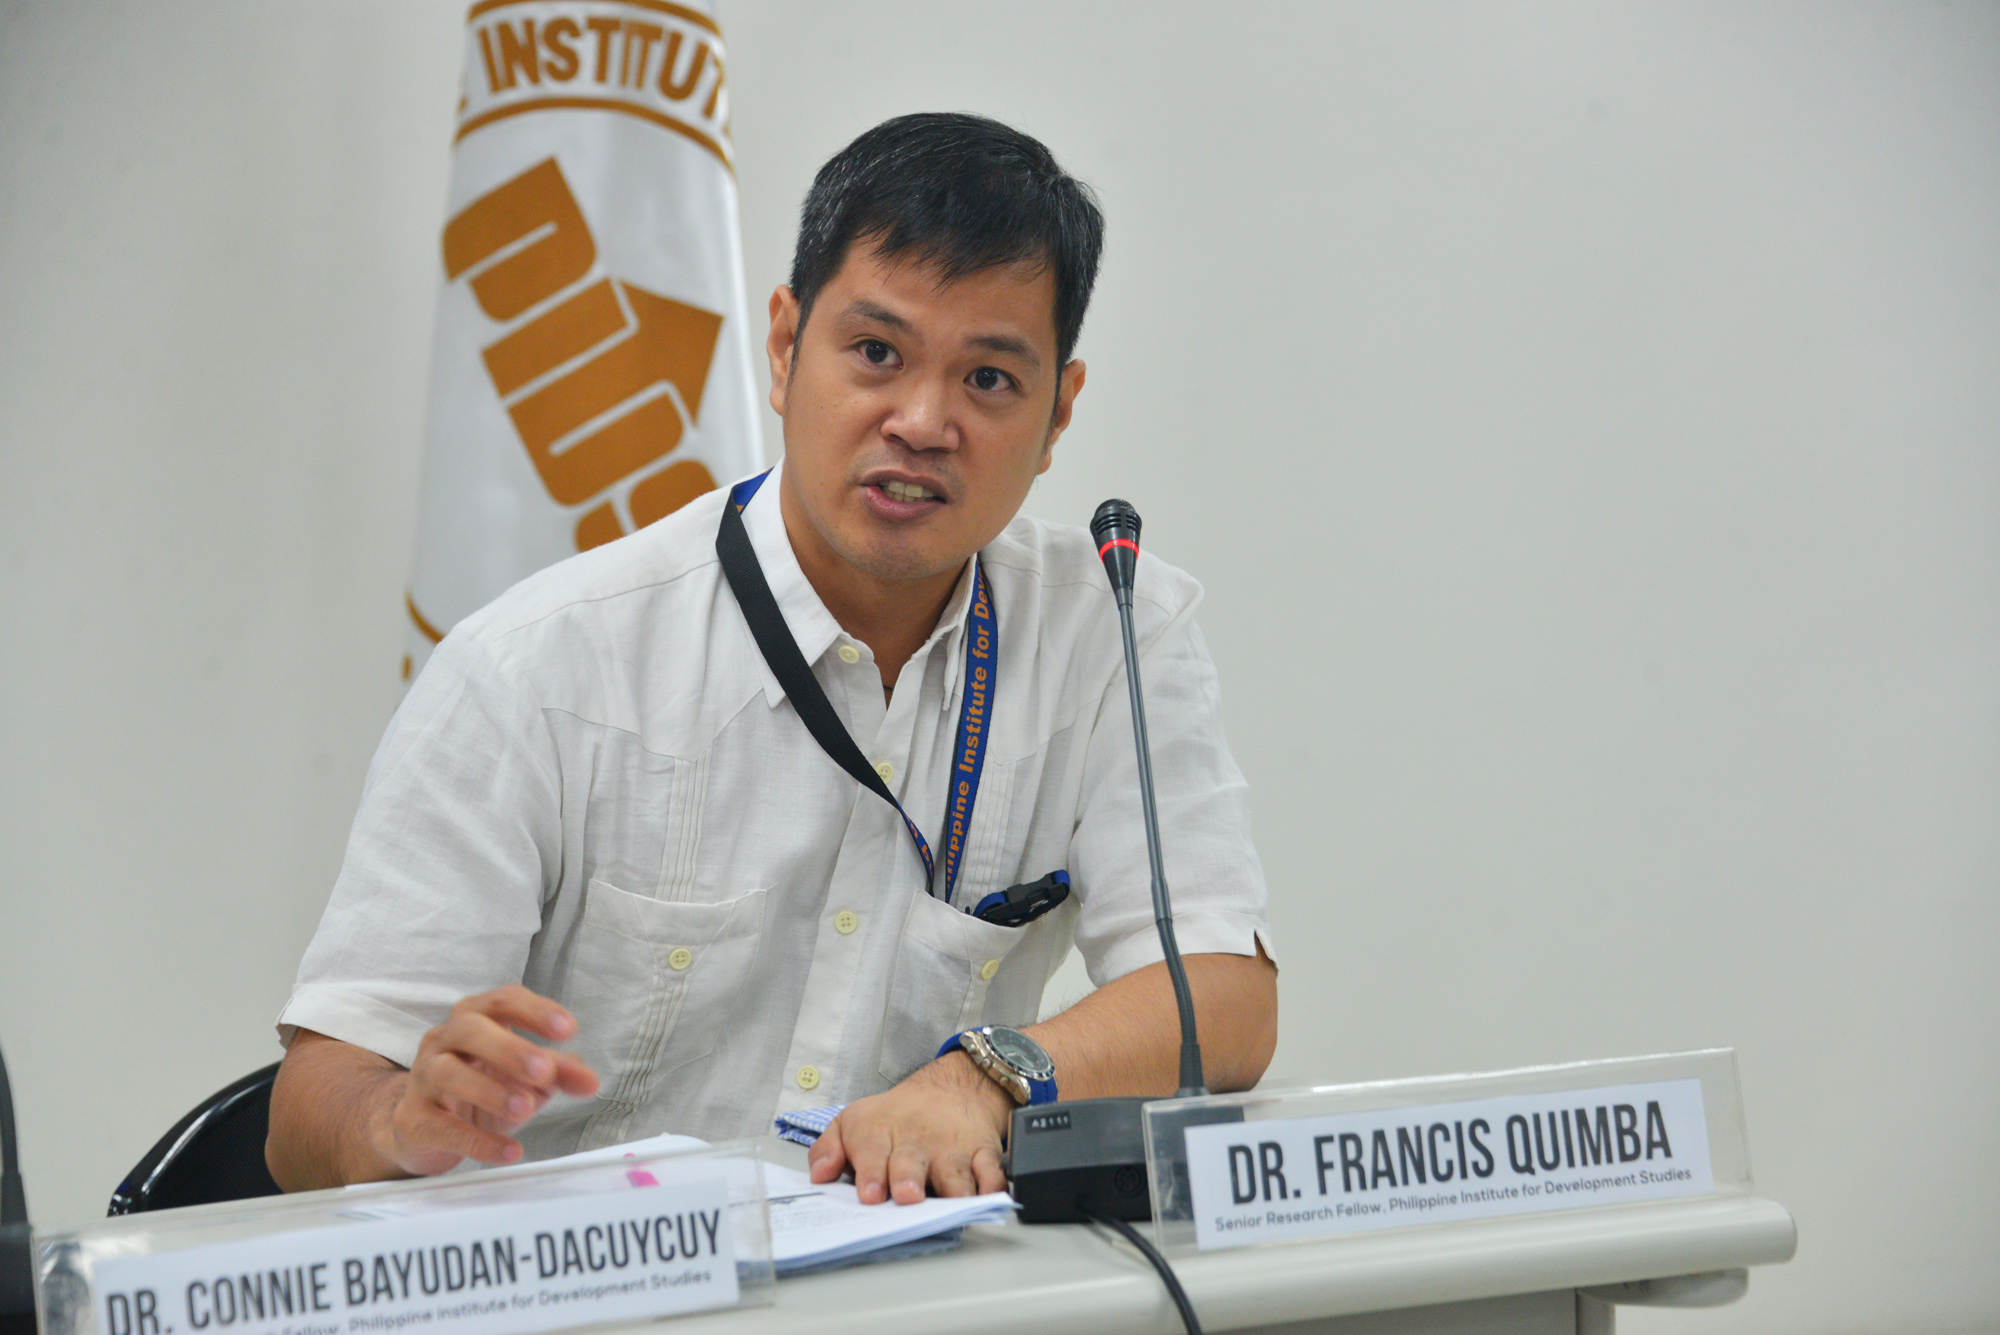 Public Seminar on Global Trade and SMEs-pids-tradesmes-14-20191016.jpg